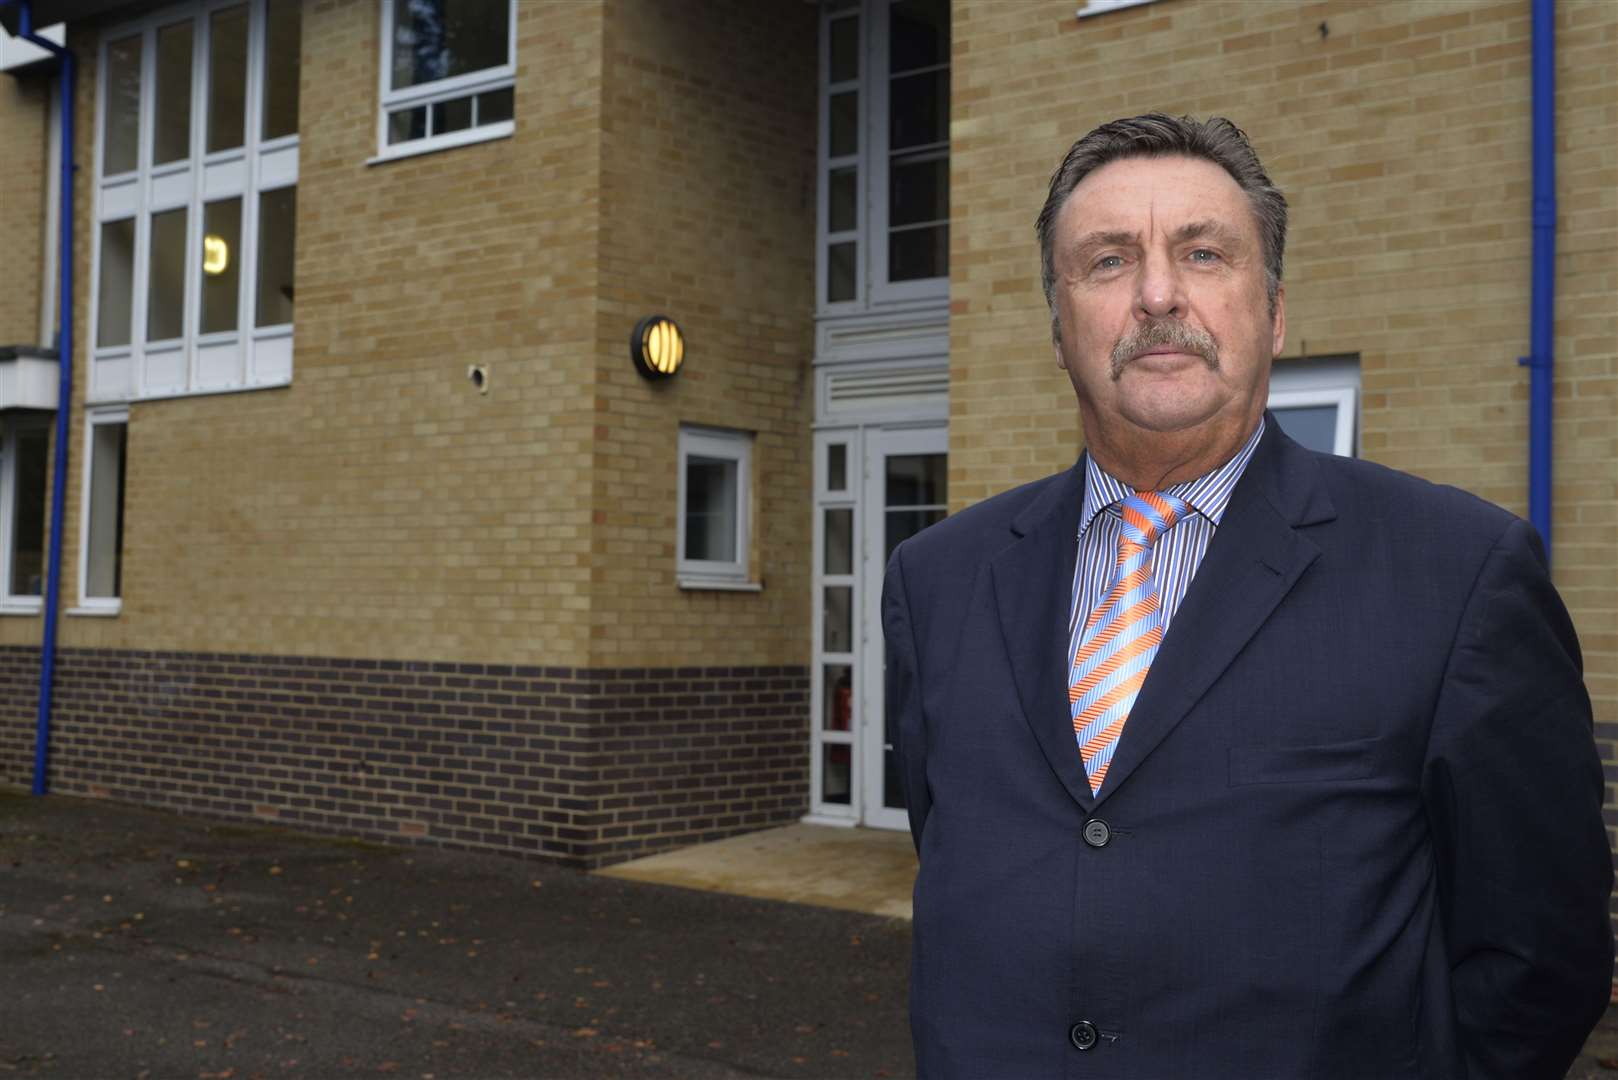 Phil Karnavas is heading up a new 6th form college on the former Chaucer School, Spring Lane, Canterbury Picture: Ruth Cuerden FM4511000 (6639194)